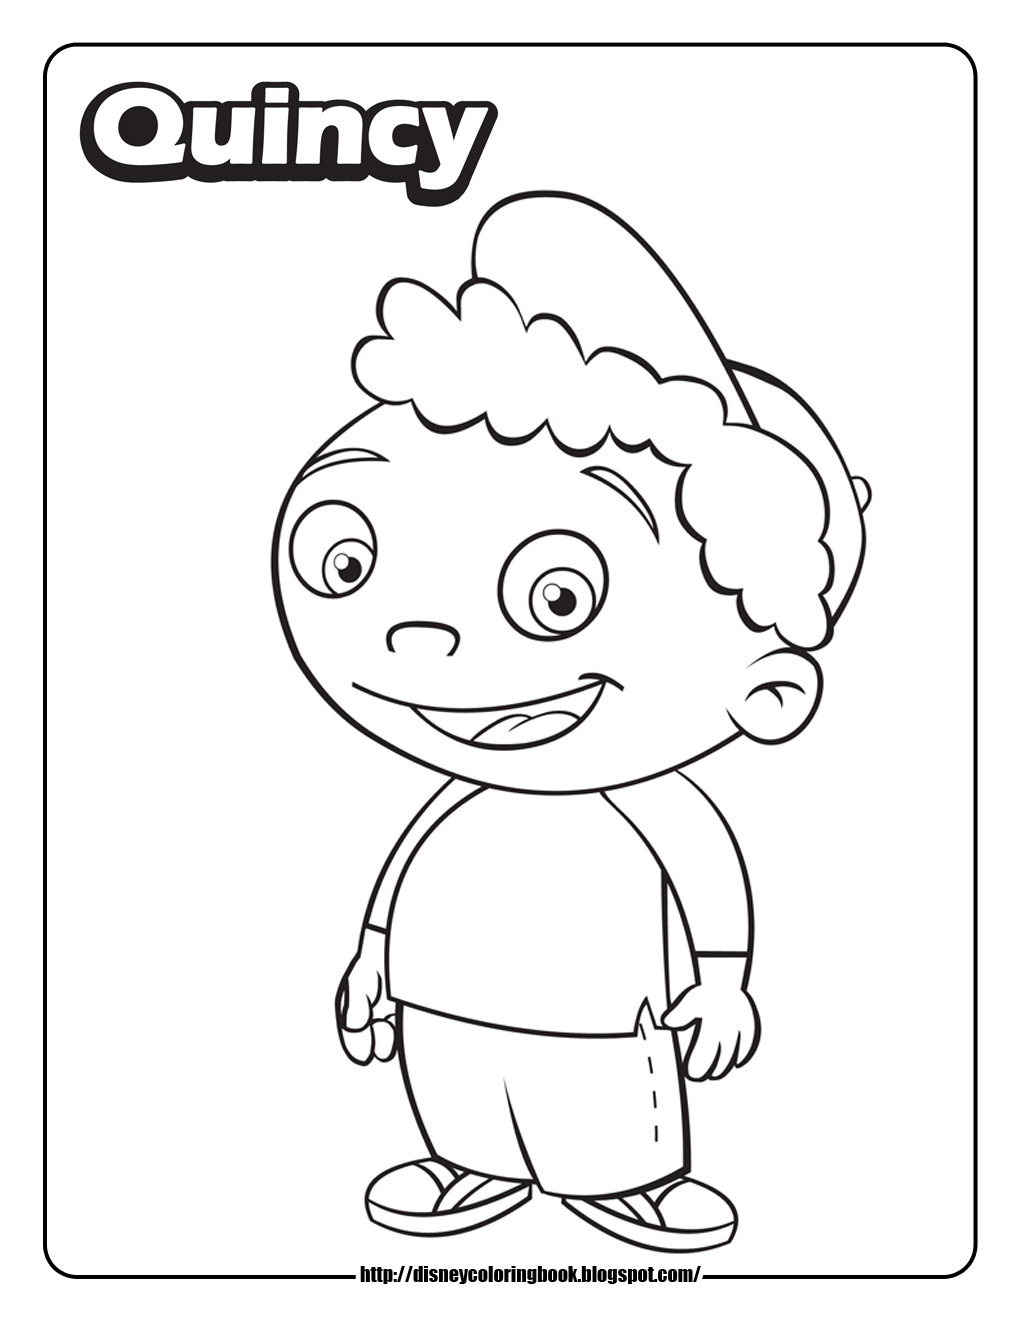 Little Einsteins 3: Free Disney Coloring Sheets | Learn To ...